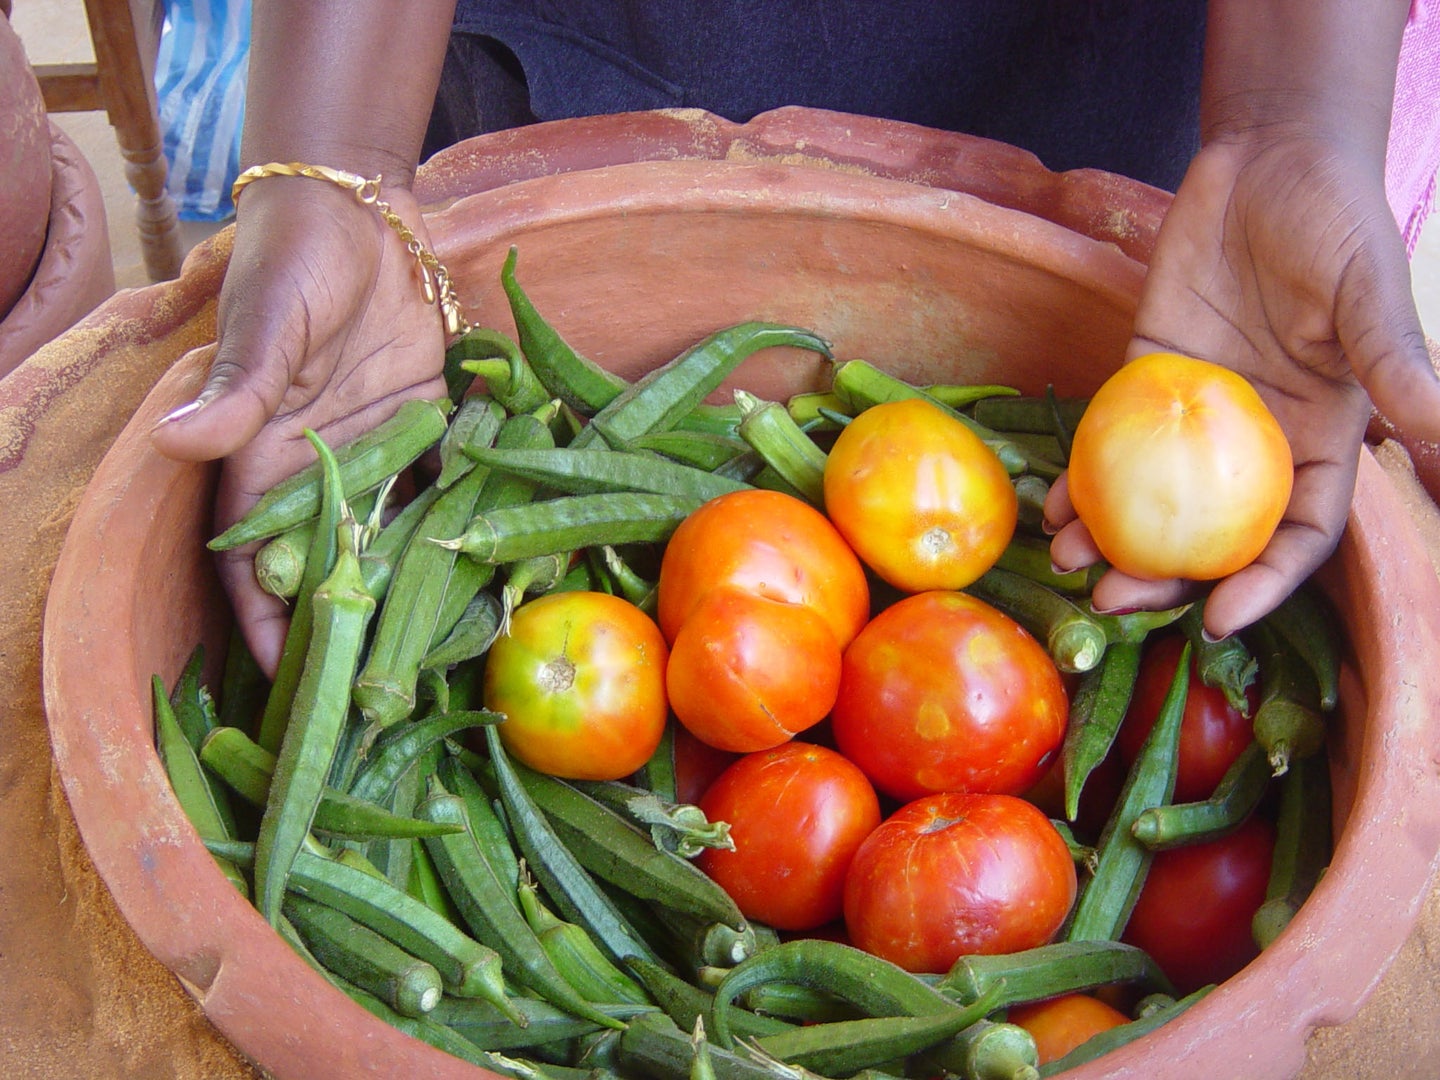 A Black person reaching their hands into a zeer pot—a type of DIY refrigerator—full of green beans, tomatoes, and other produce.